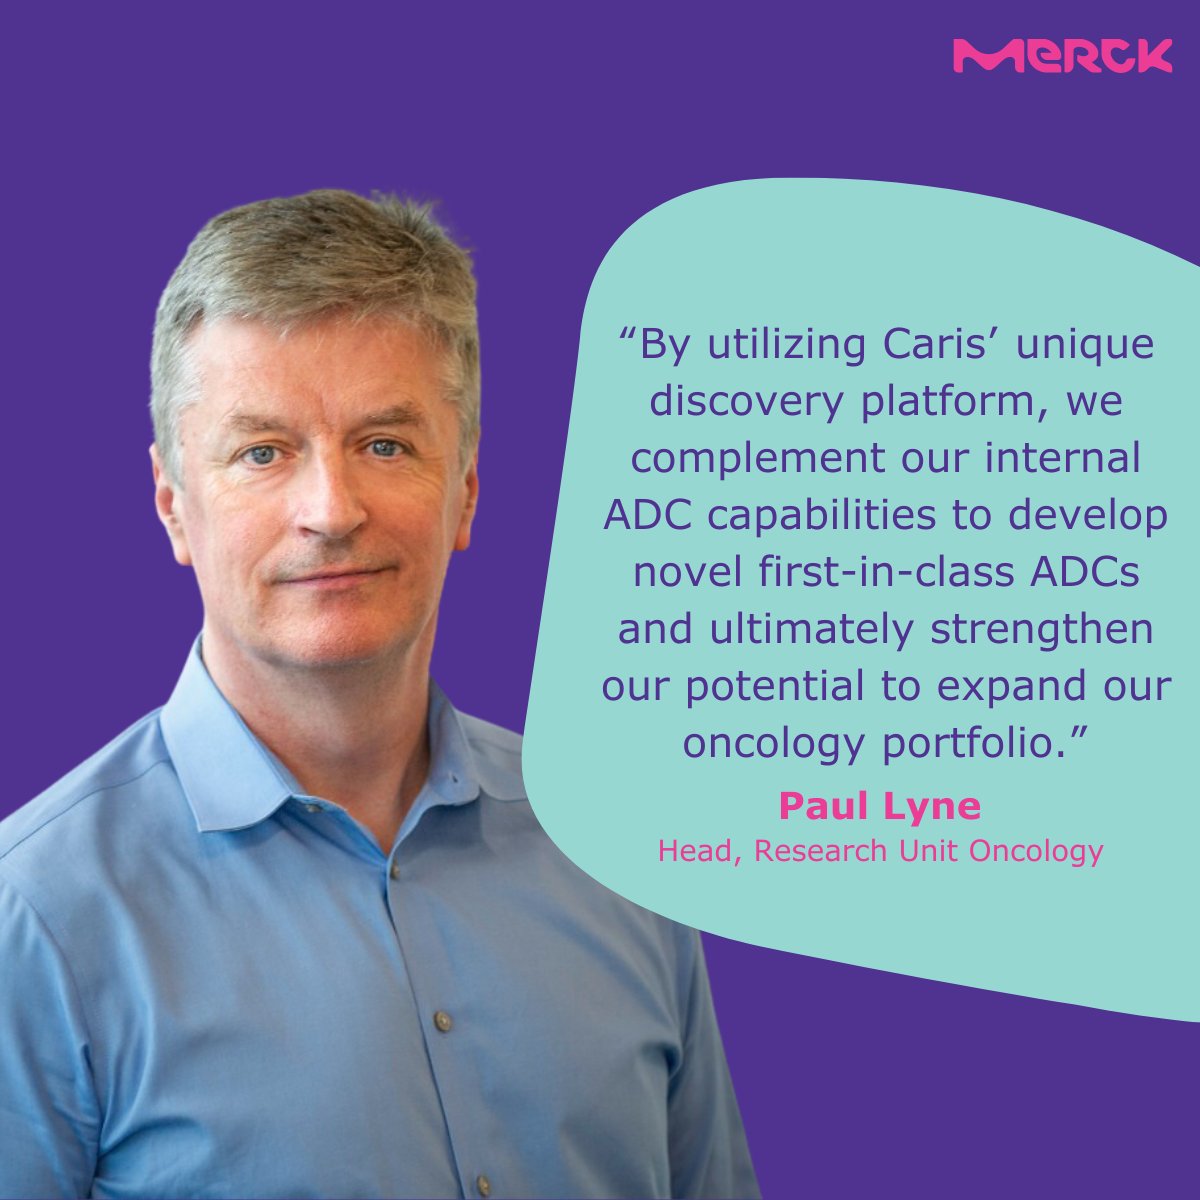 NEWS 📢: We’re partnering with @carisls to accelerate the discovery and development of first-in-class antibody-drug conjugates (#ADCs) for cancer patients. ms.spr.ly/6013c0ueN #Oncology #Partnership